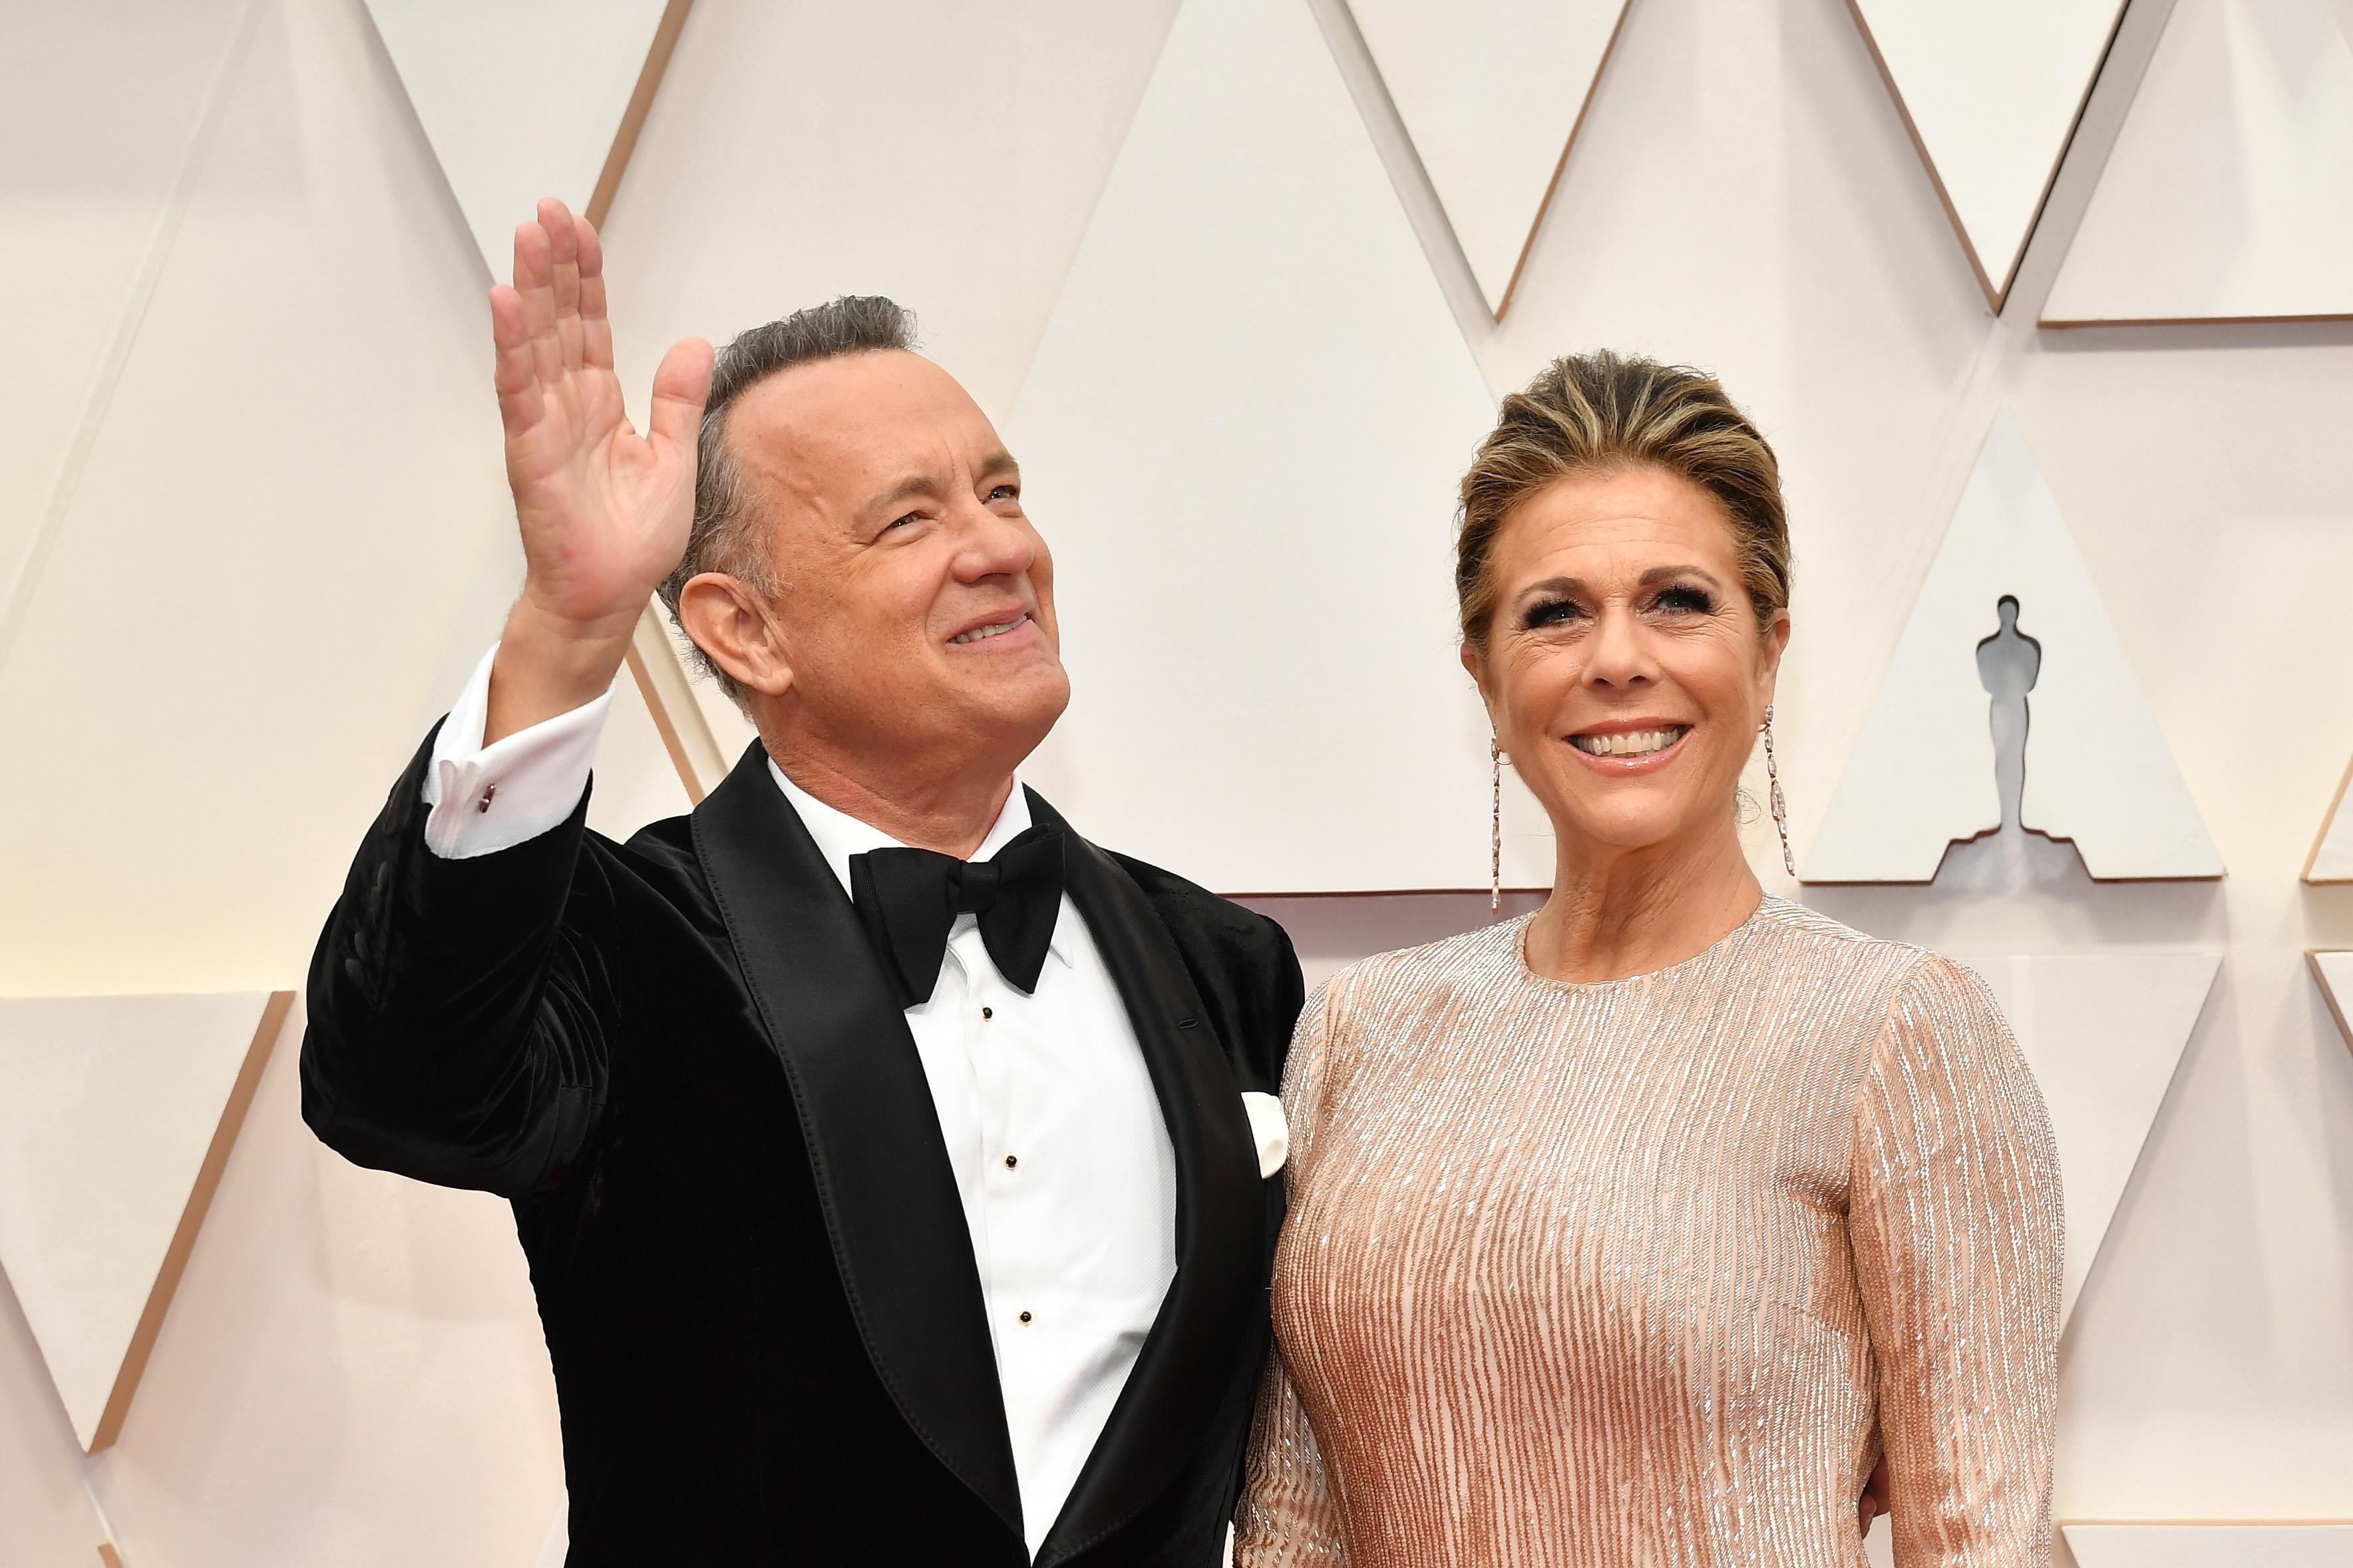 Tom Hanks, in a tuxedo, and Rita Wilson, in a beige evening gown, on the red carpet at the academy awards.